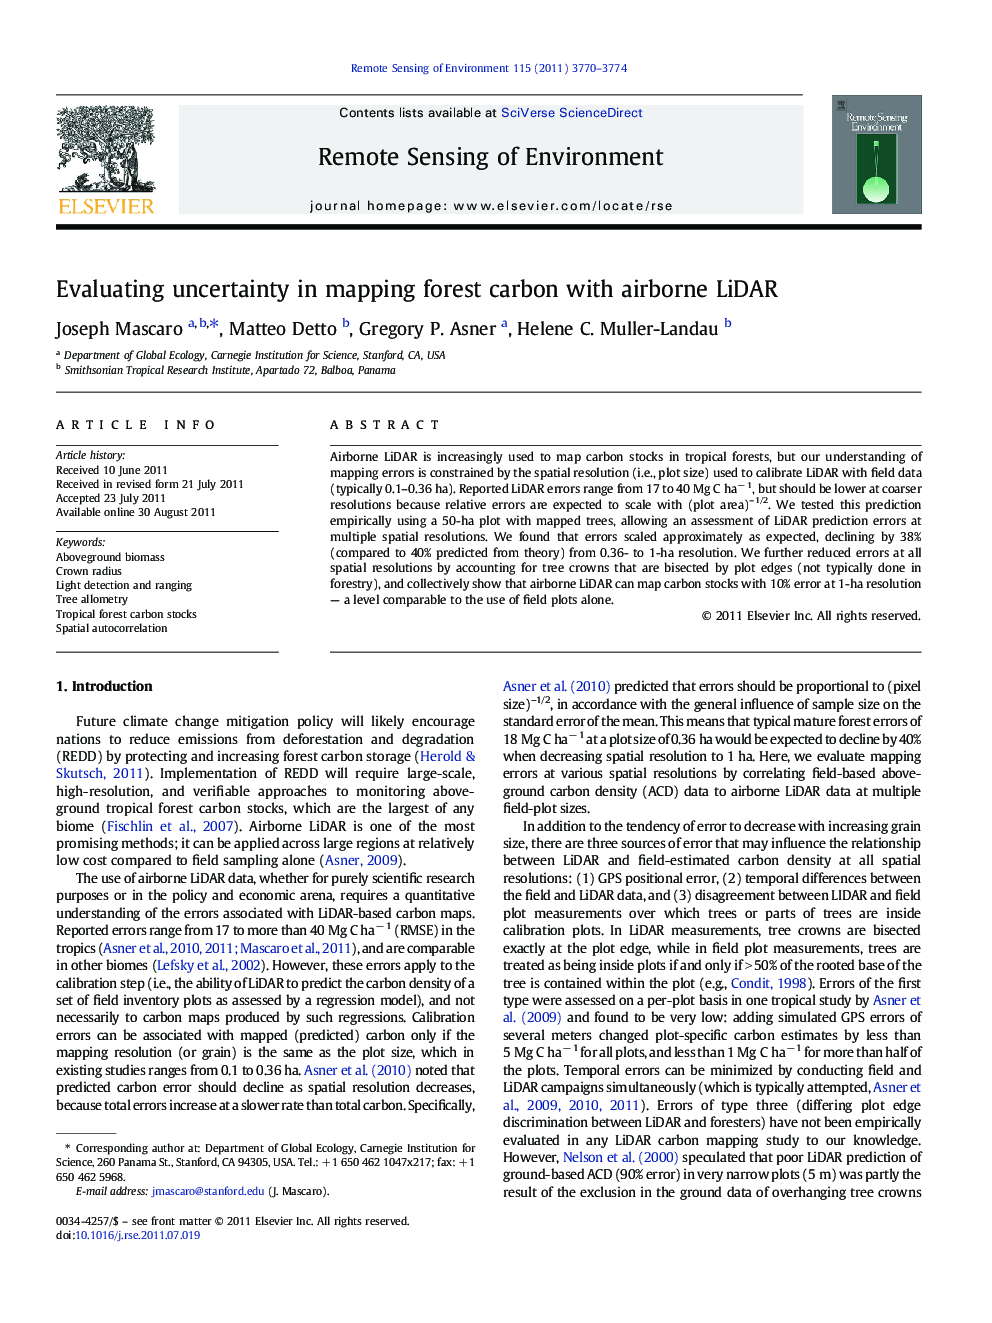 Evaluating uncertainty in mapping forest carbon with airborne LiDAR